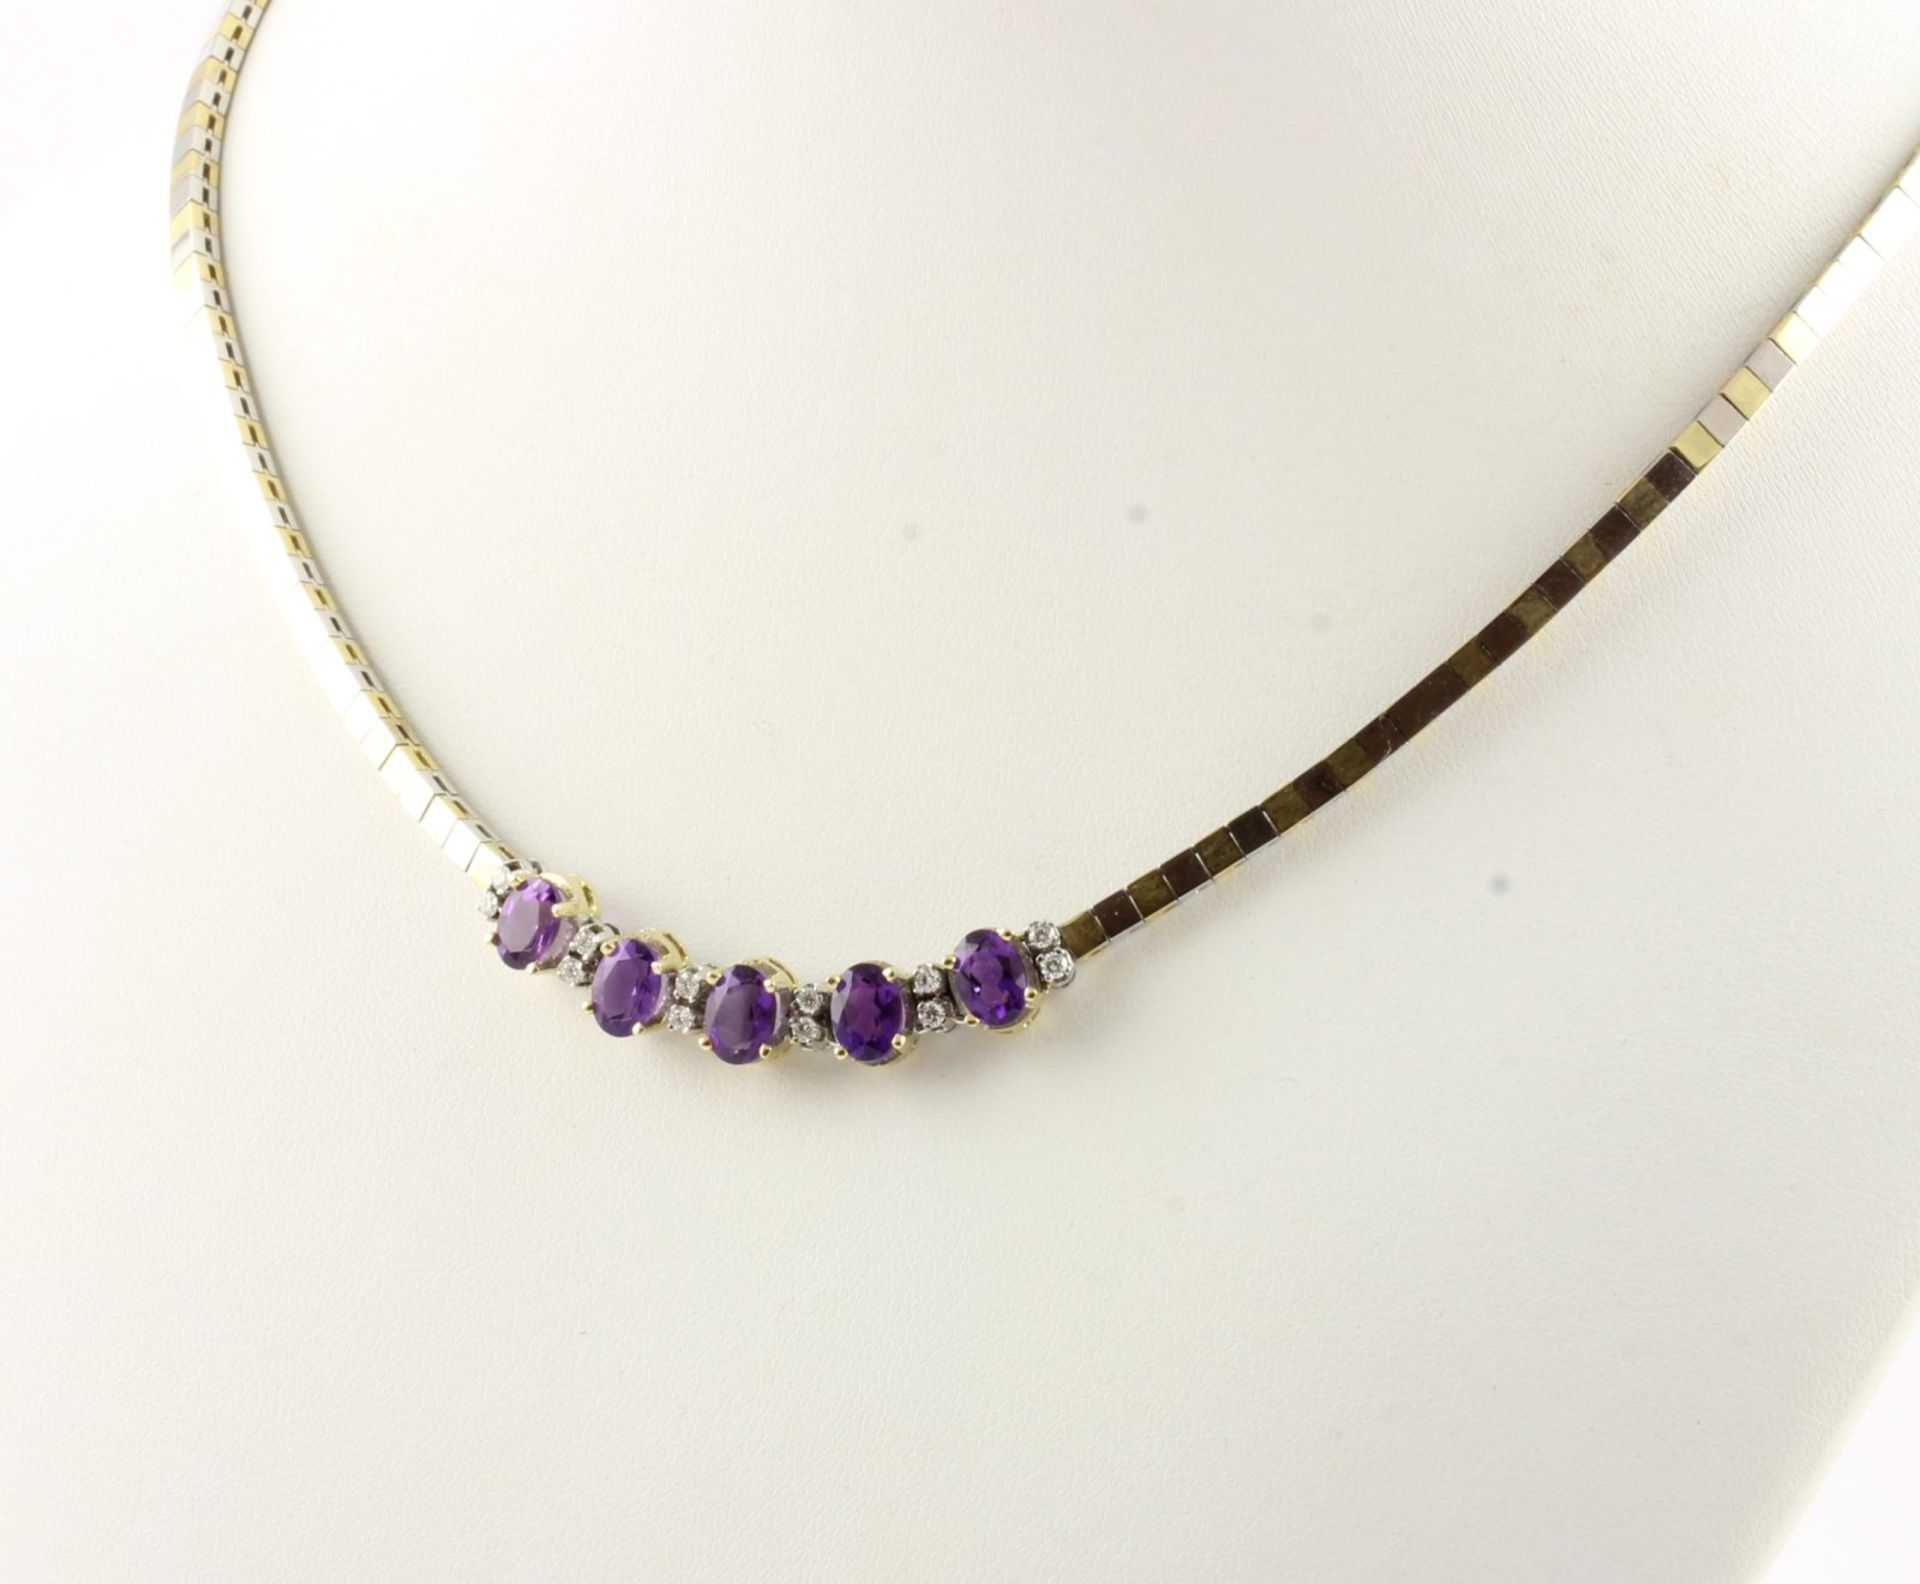 Amethyst-Collier, 585/ooo WG/GG, Brill. - Image 2 of 2